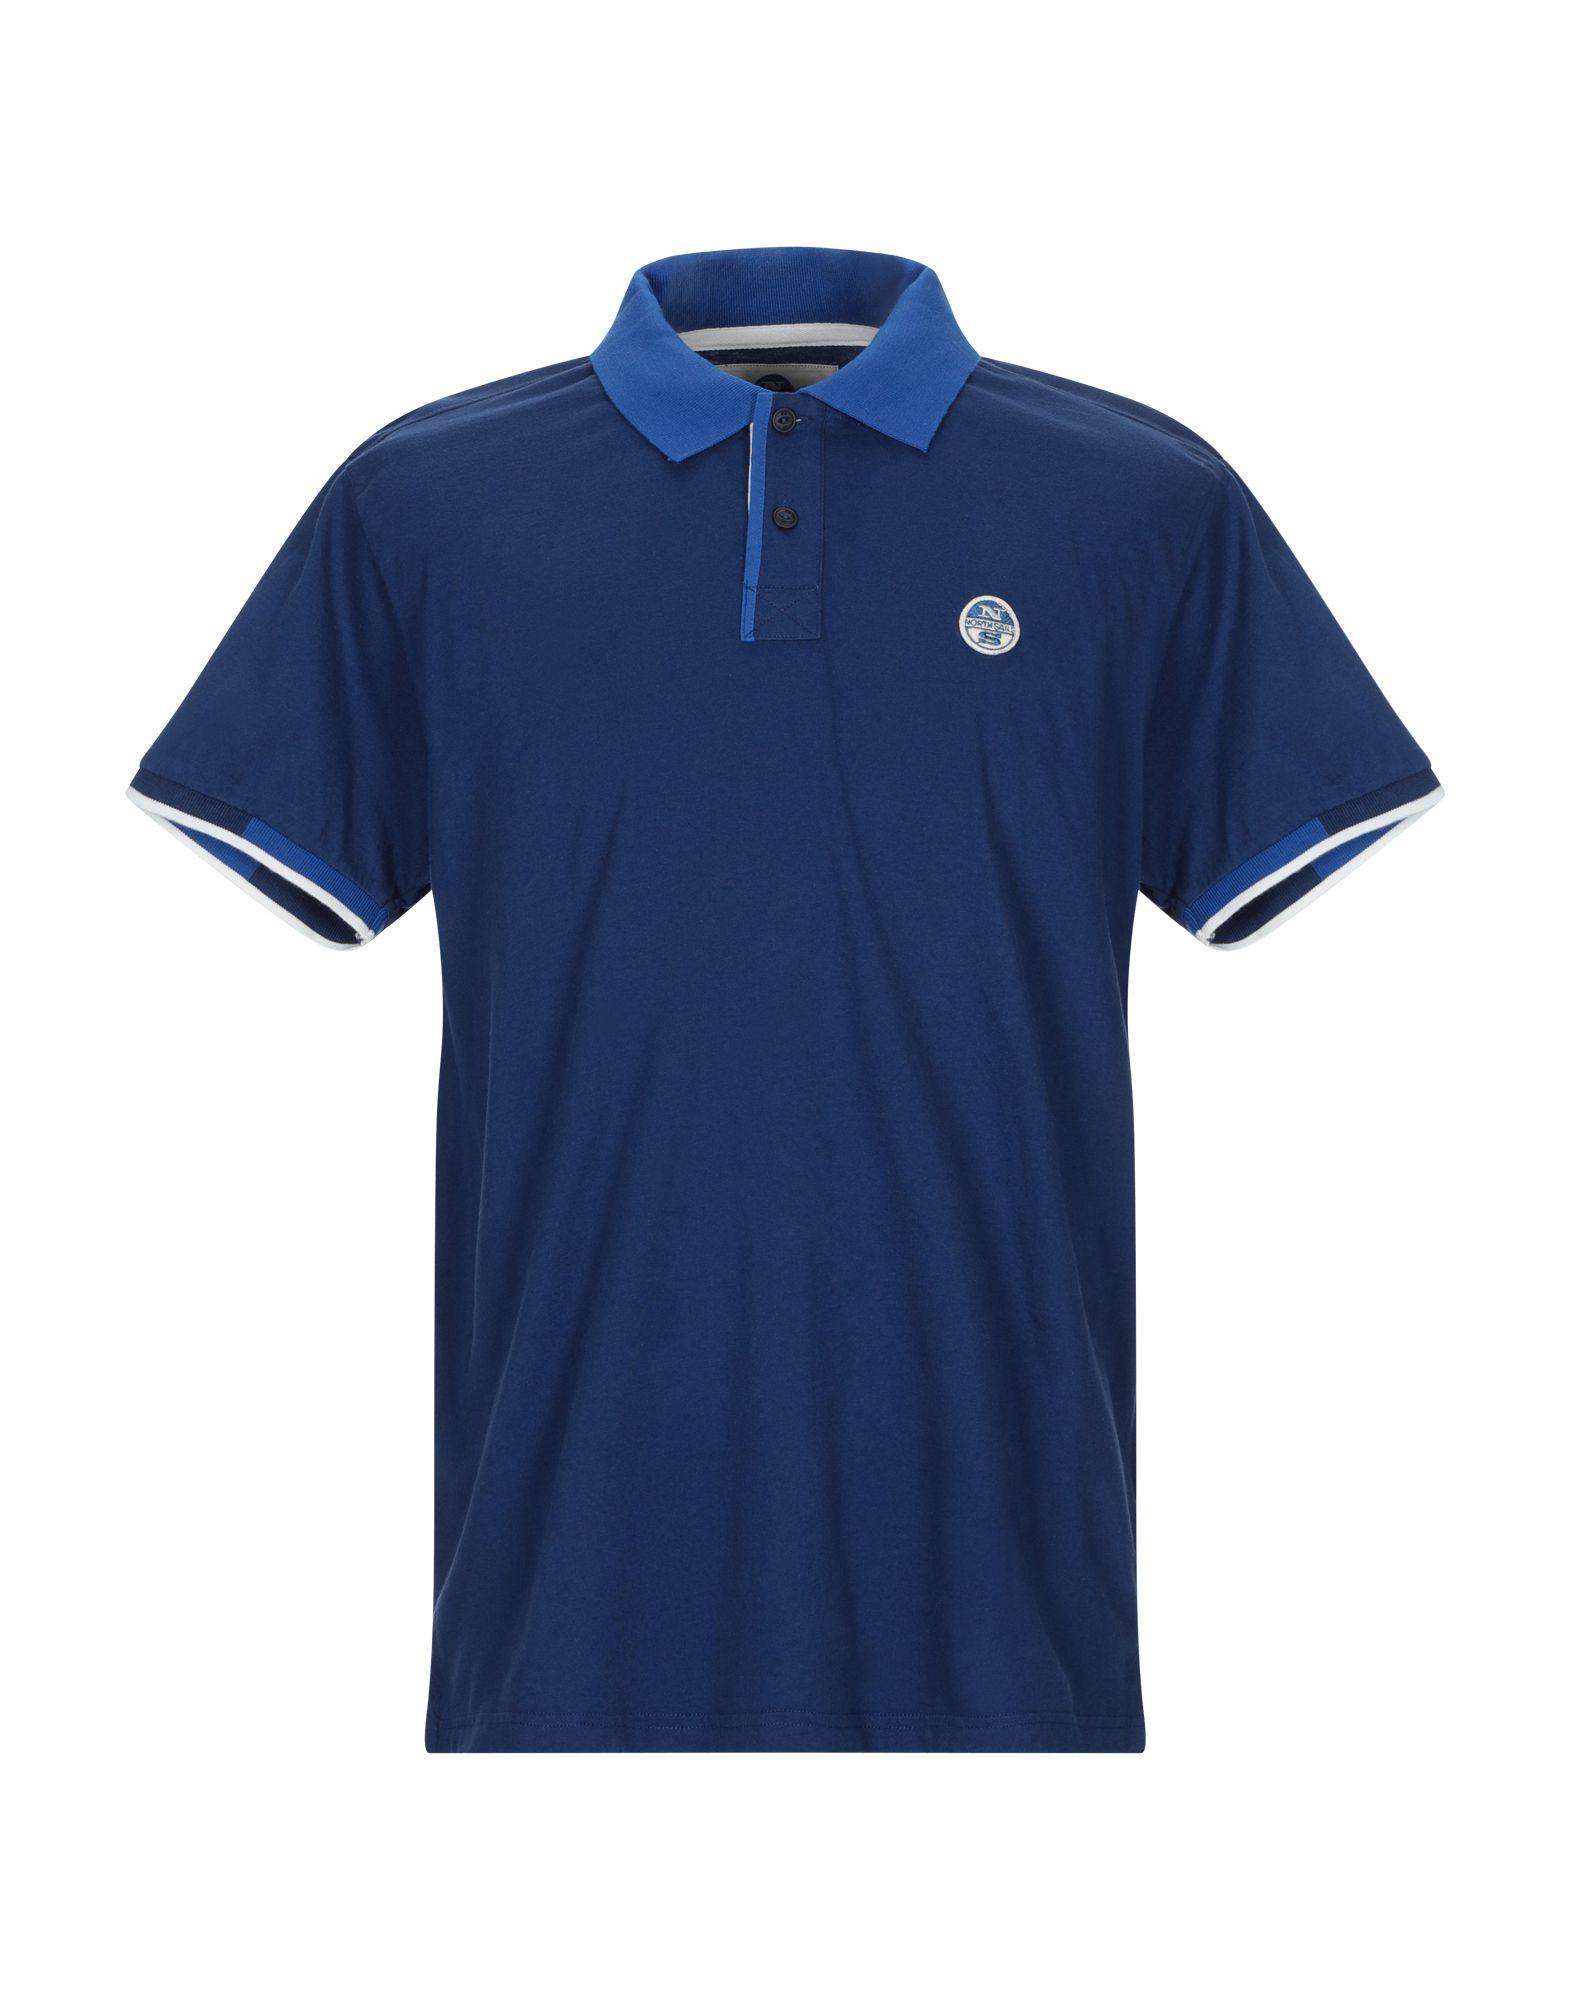 North Sails Polo Shirt in Blue for Men - Lyst